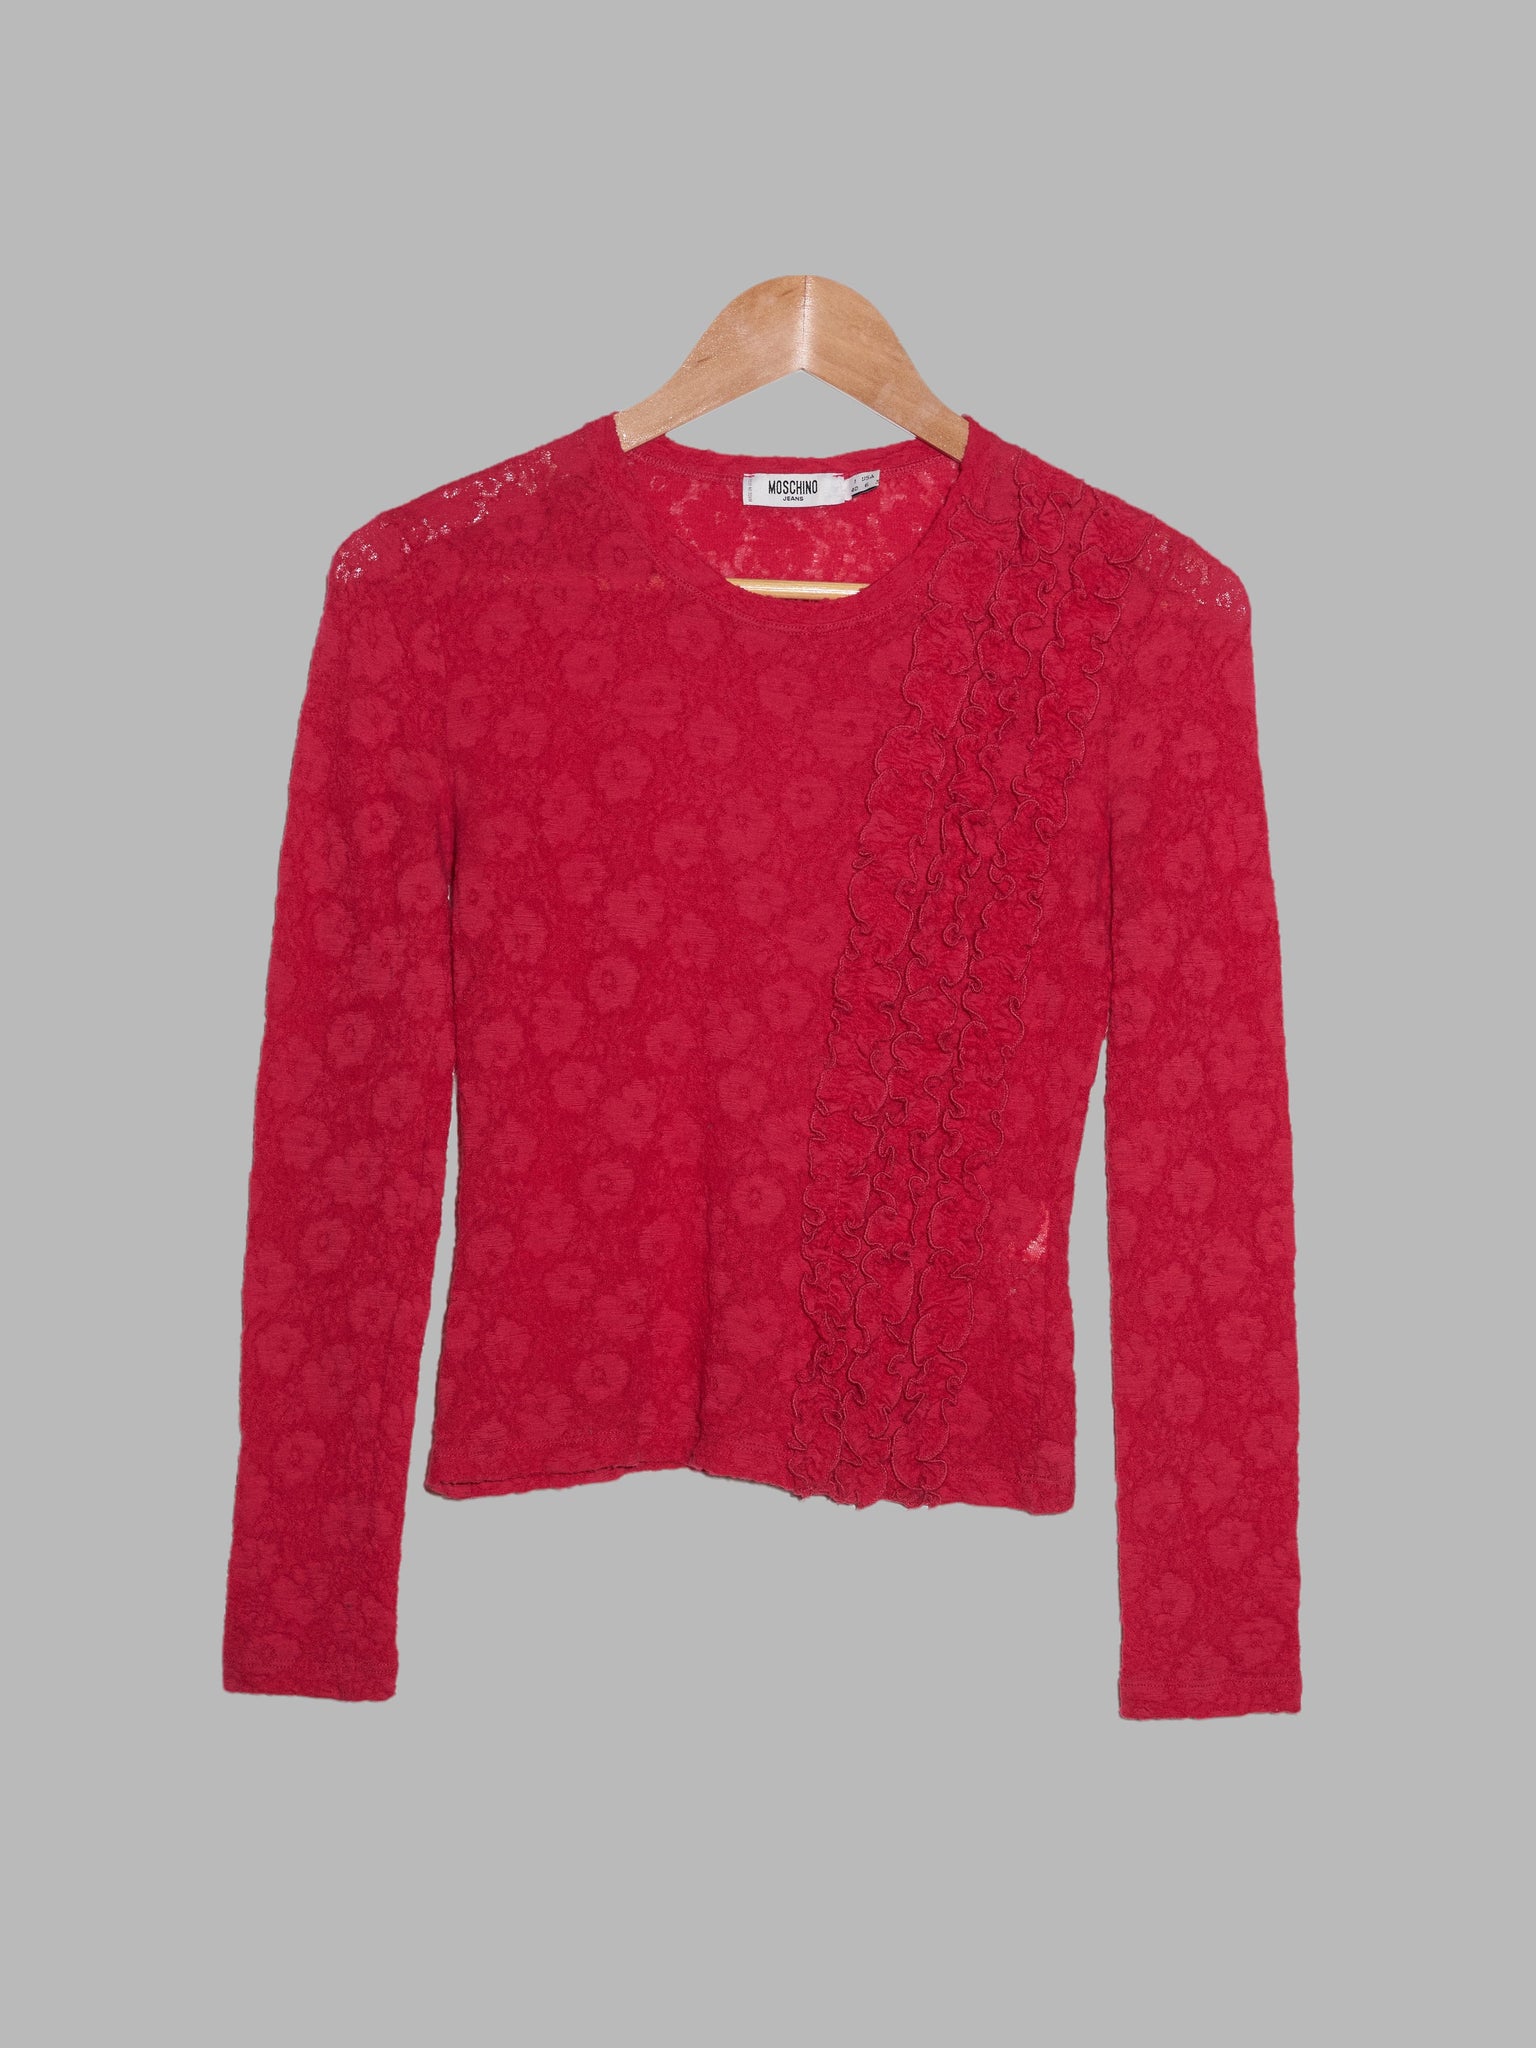 Moschino Jeans red pink wool lace ruffle long sleeve top - size 40